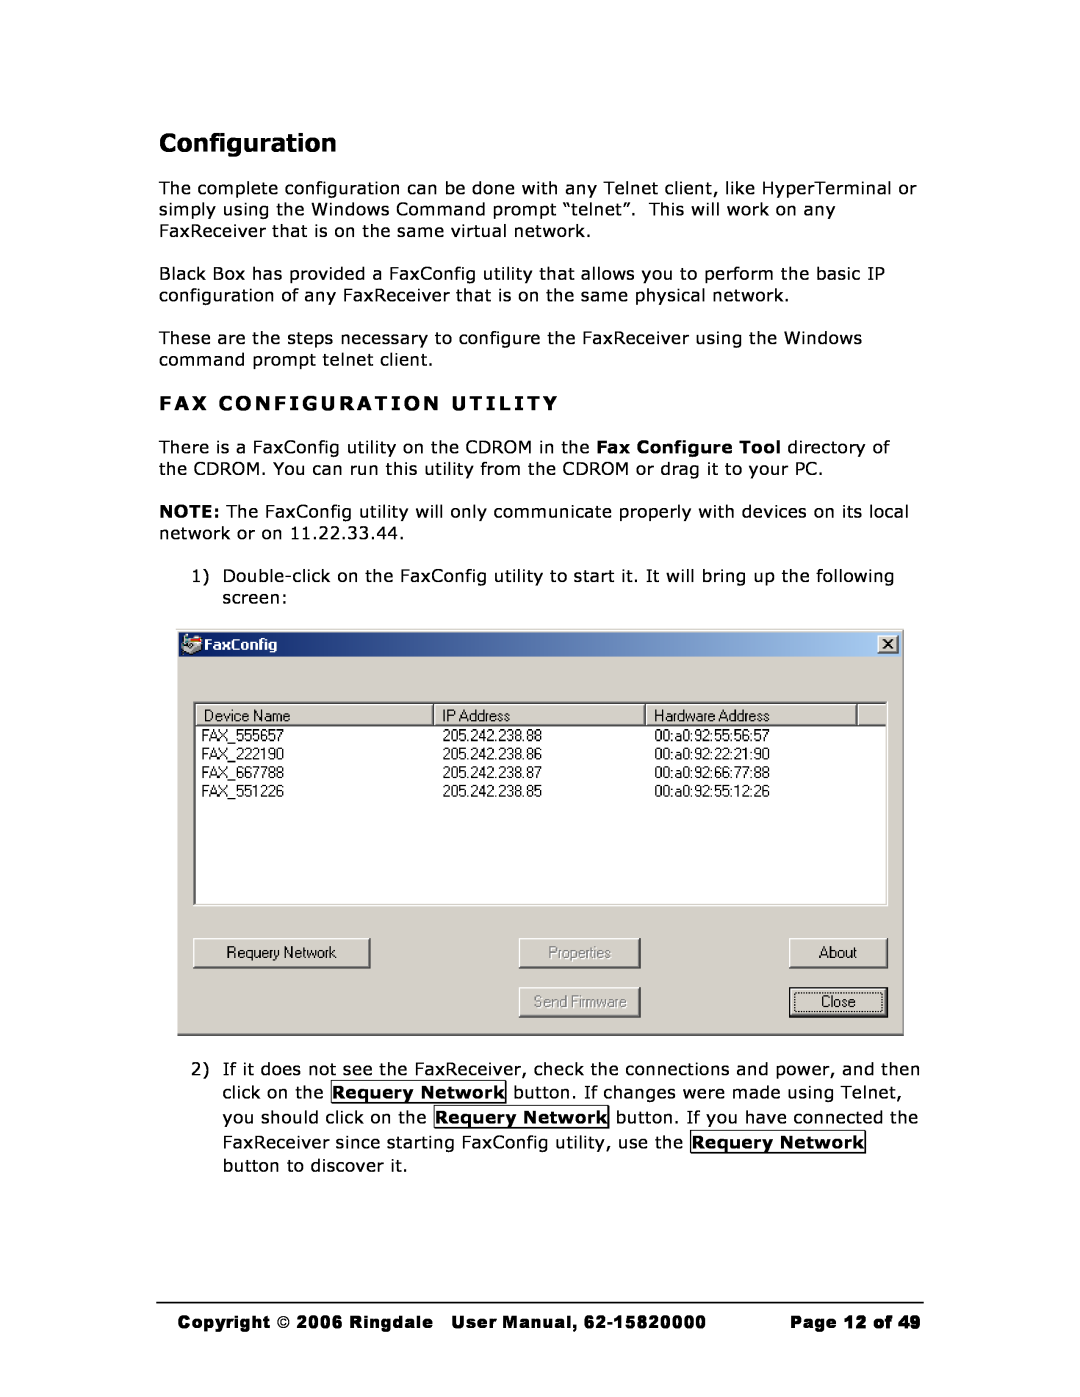 Black Box MC200A user manual Fax Configuration Utility, Copyright  2006 Ringdale User Manual, Page 12 of 